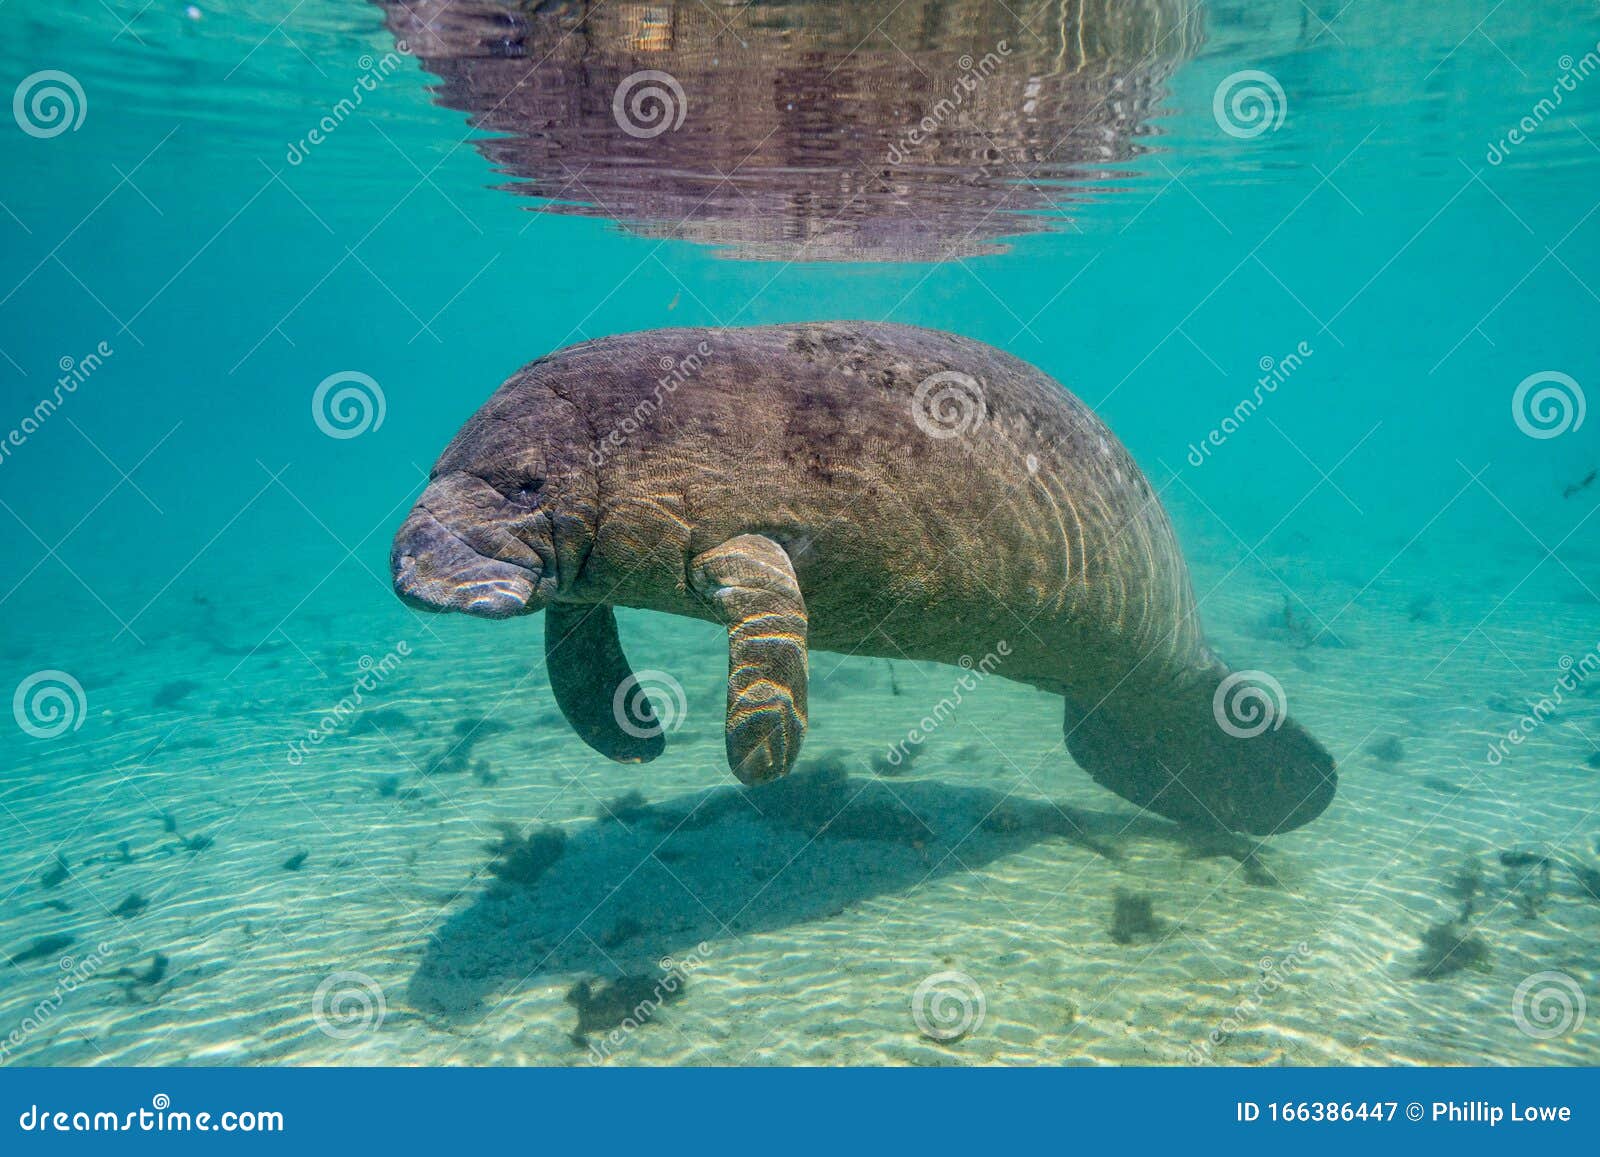 wide shot of a west indian manatee in a warm, florida spring